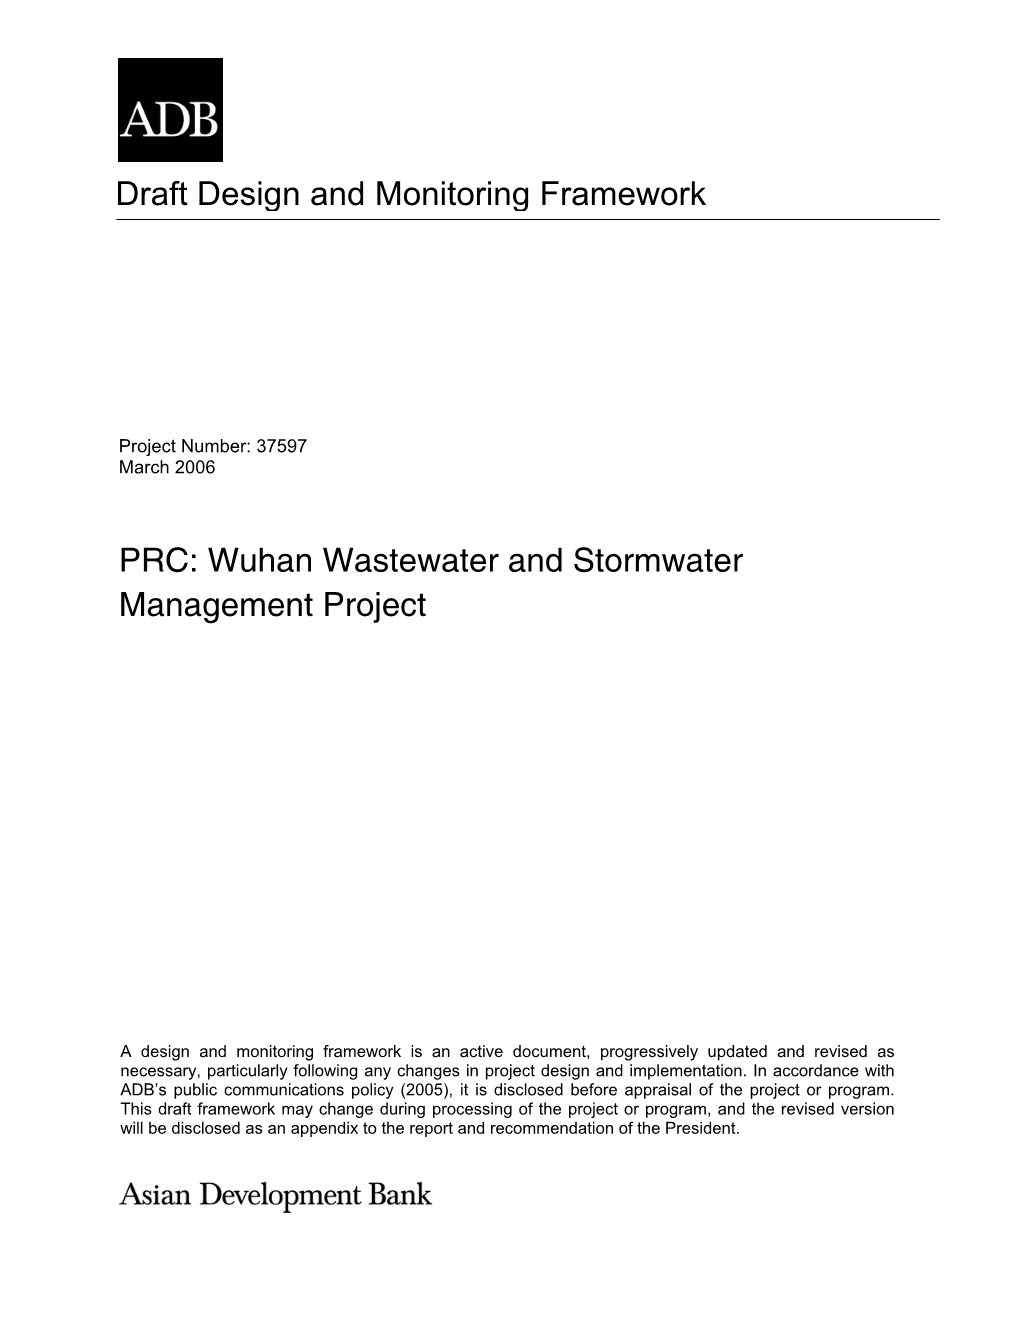 PRC: Wuhan Wastewater and Stormwater Management Project